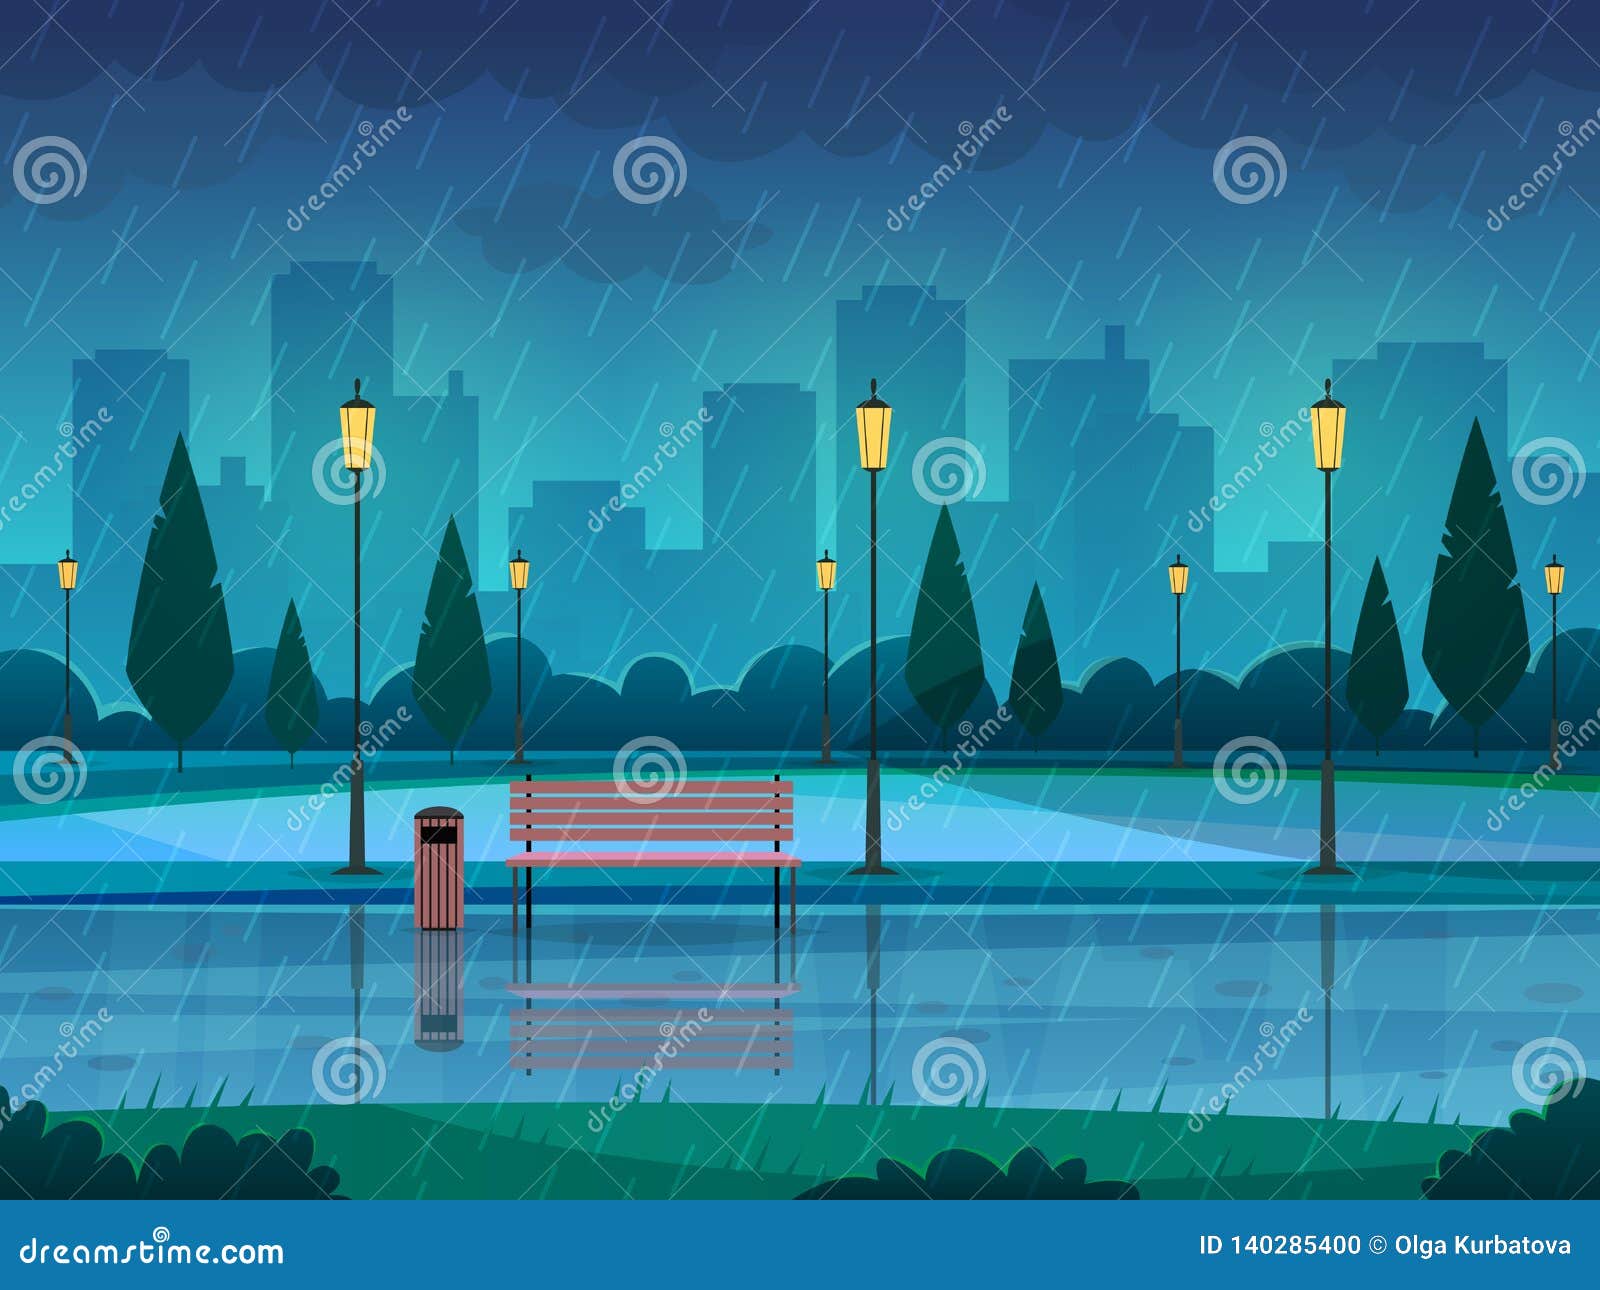 Rainy Stock Illustrations 45 940 Rainy Stock Illustrations Vectors Clipart Dreamstime Rainwallpaper is powerful live wallpaper for windows, it can set video and webpage as your wallpaper easily. https www dreamstime com rainy day park raining public rain city nature season path bench street lamp landscape flat vector background illustration image140285400